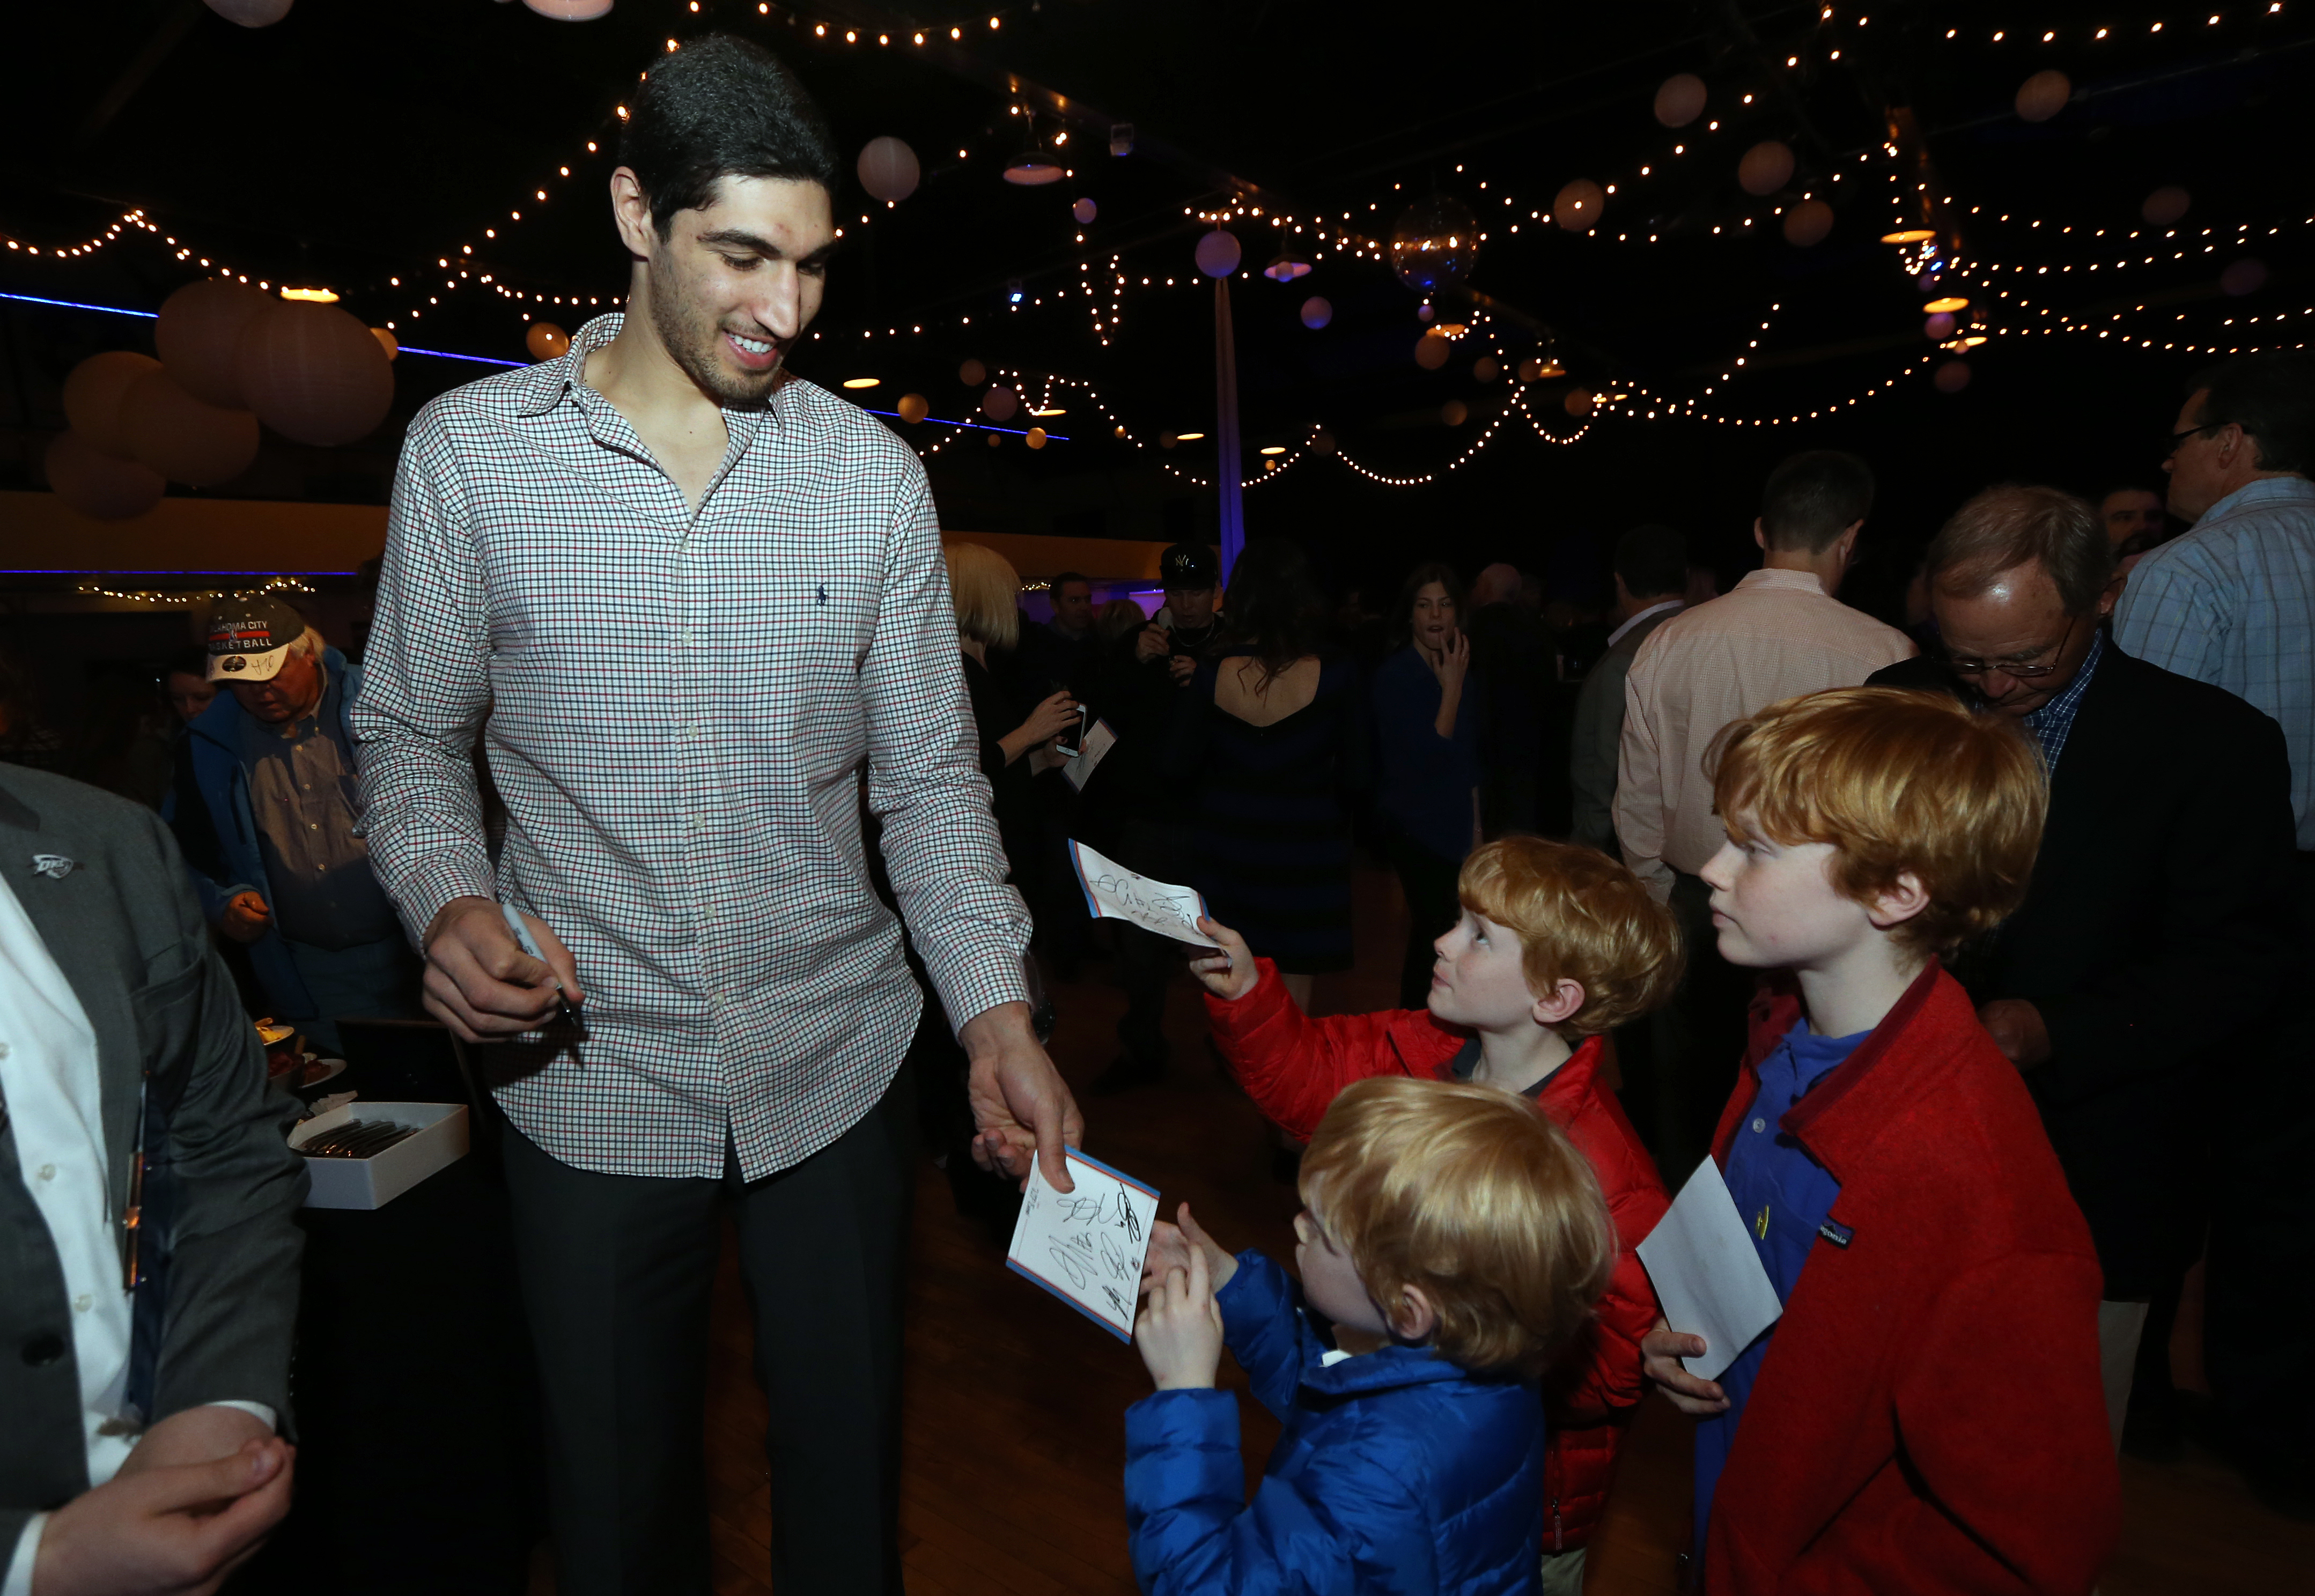 Enes Kanter #34 of the Oklahoma City Thunder signs autographs for fans at a Thunder Season ticket holder VIP event on March 3, 2015 at the Oklahoma City Farmers Market in Oklahoma City, Oklahoma. (Layne Murdoch—NBAE/Getty Images)